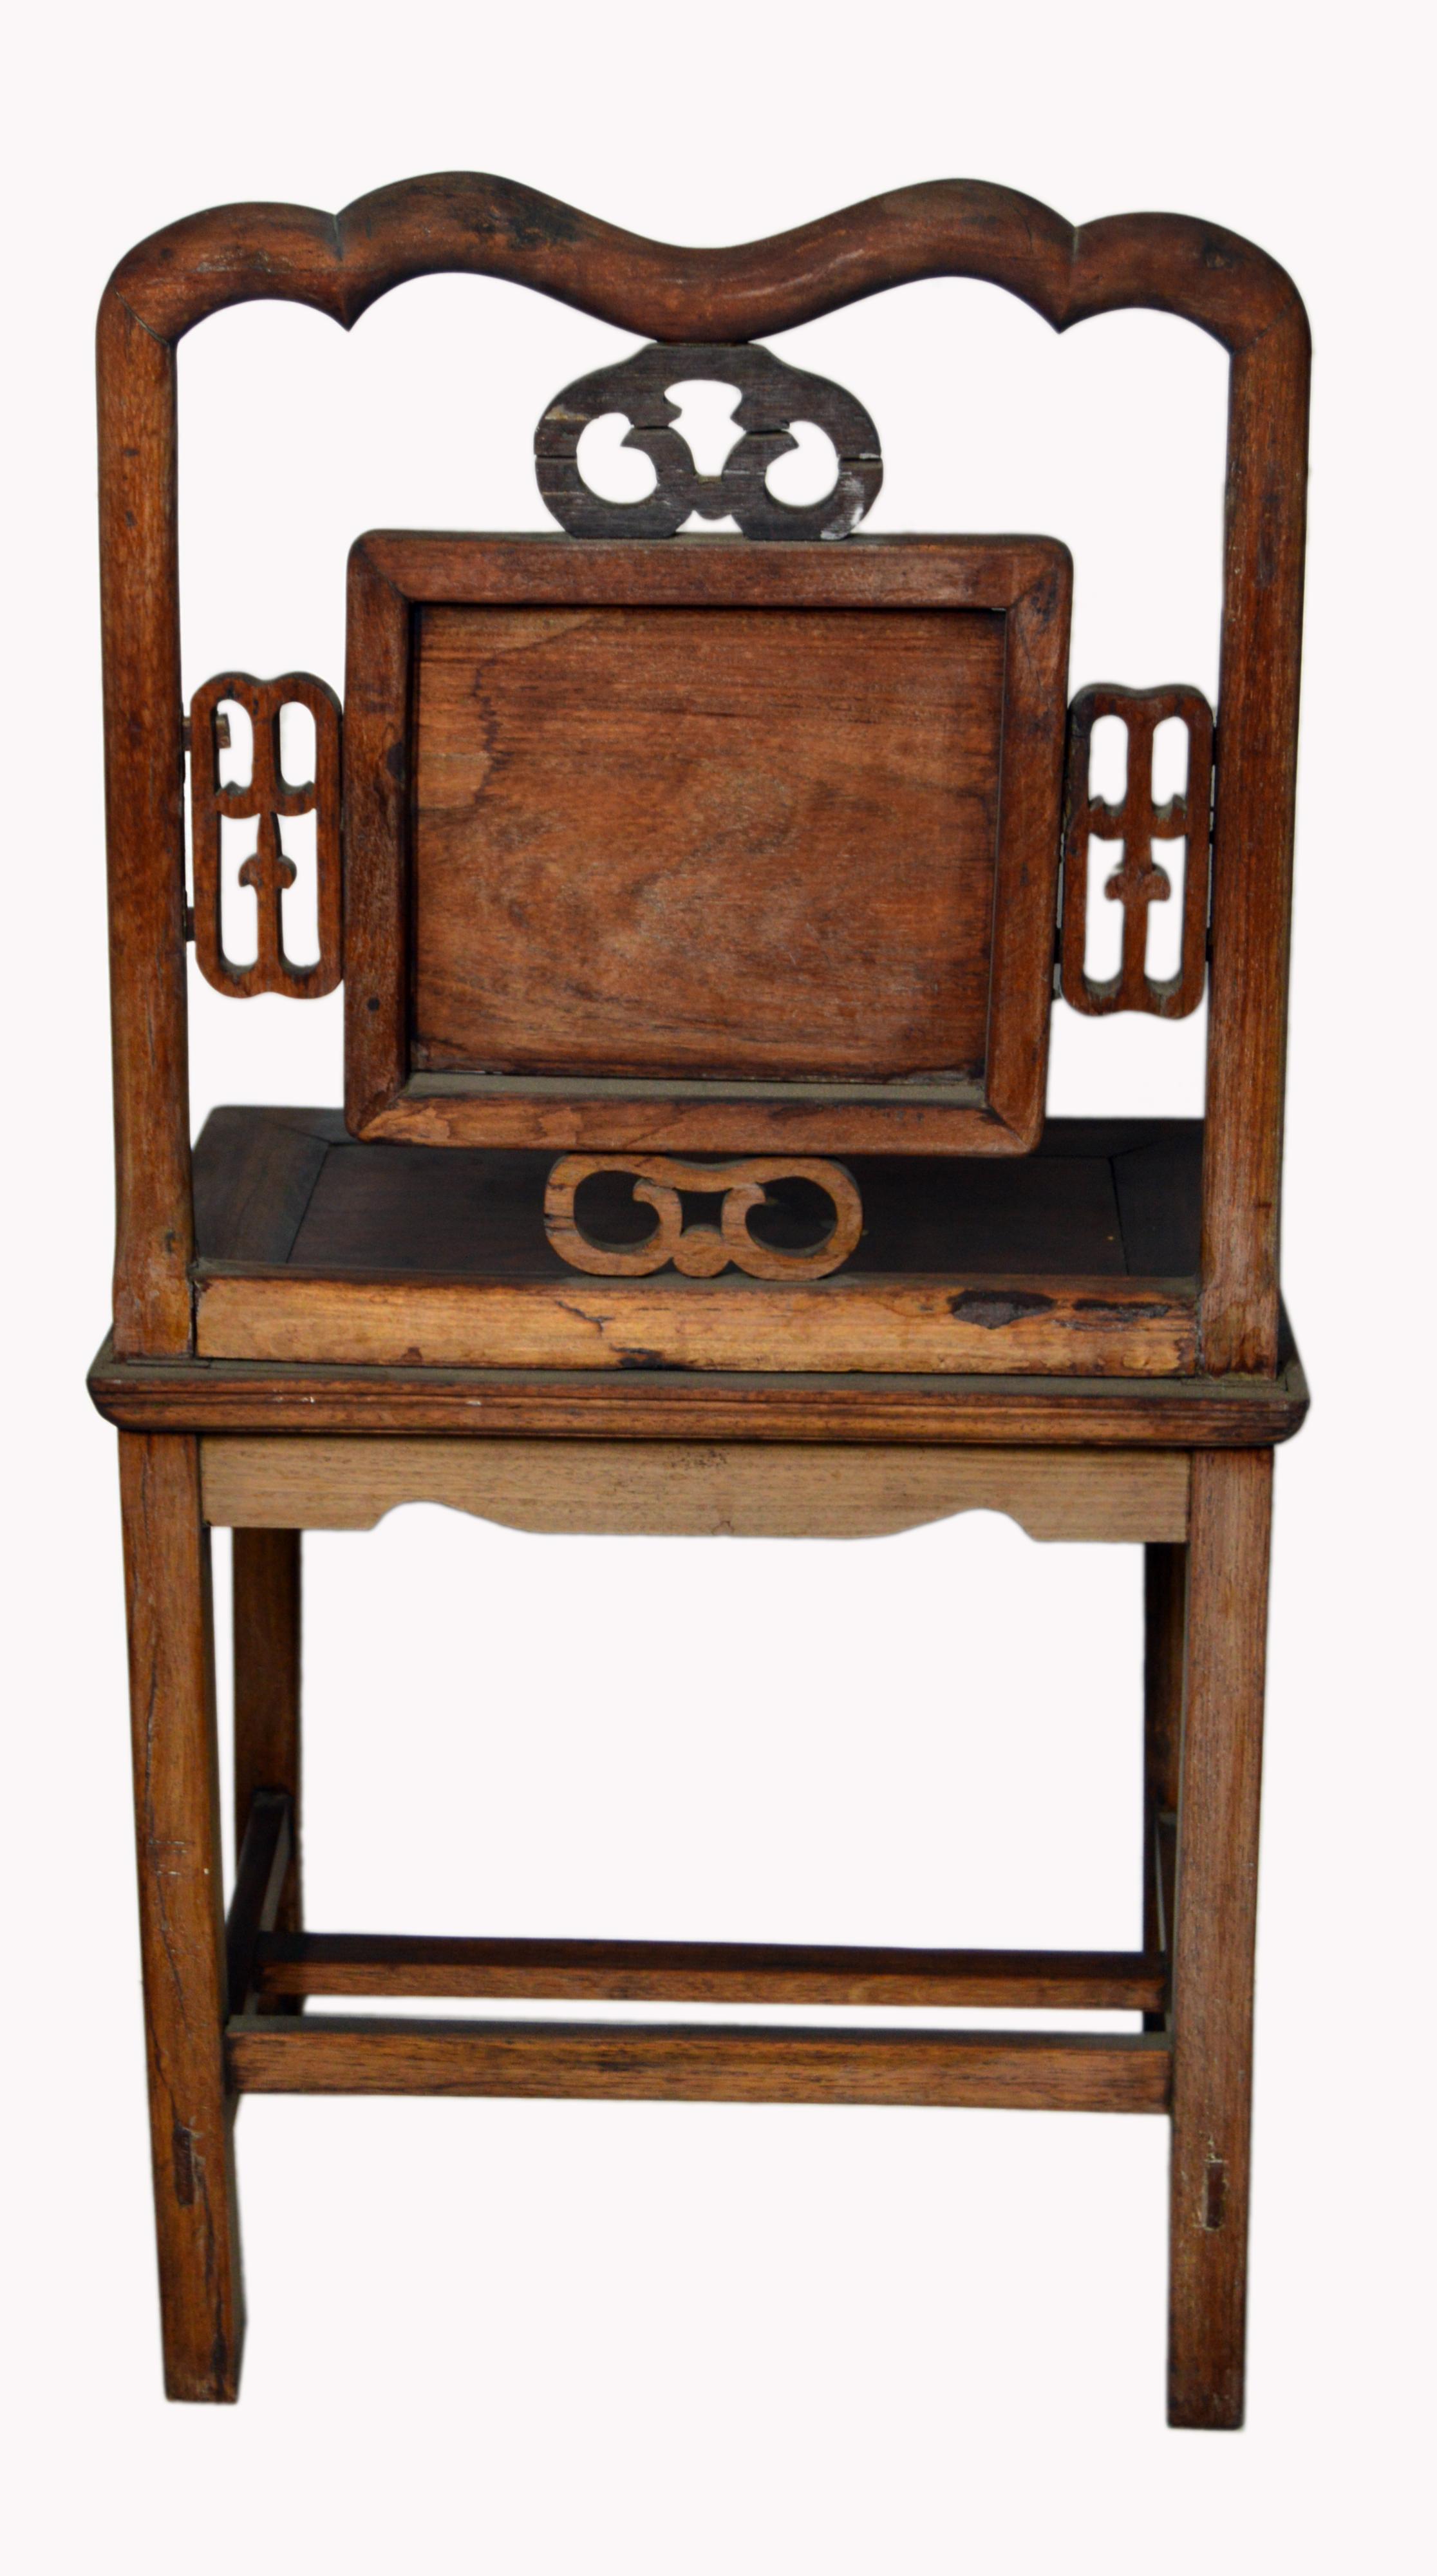 Yumu Wood Chinese 19th Century Chair with Hand-Carved Décor and Lacquered Finish For Sale 4